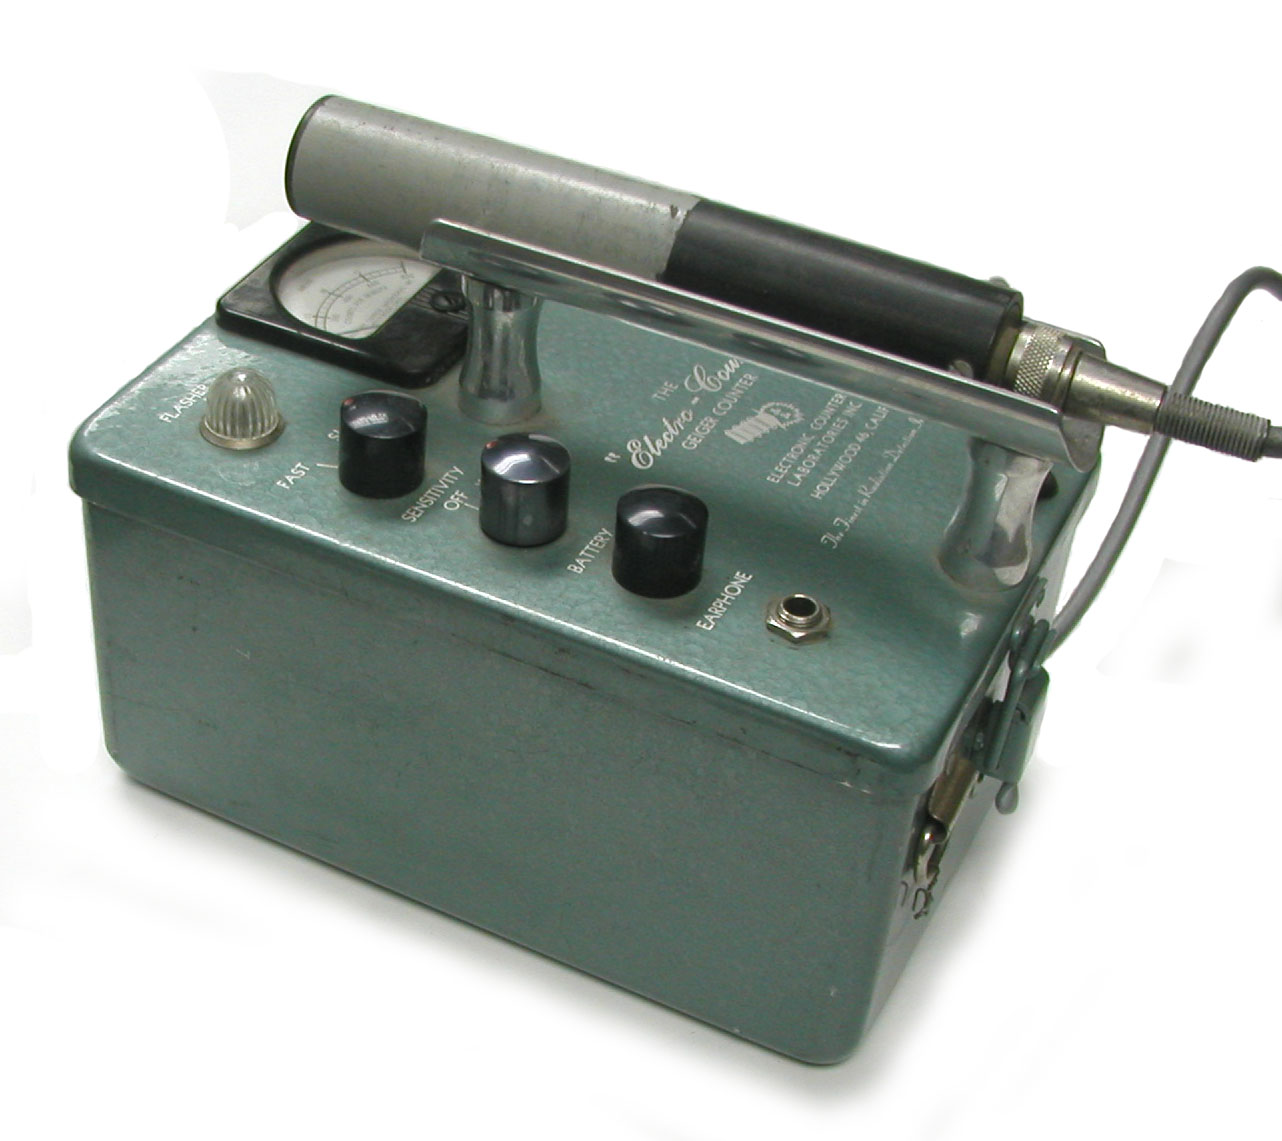 ECL  "Electro-Count" GM Detector